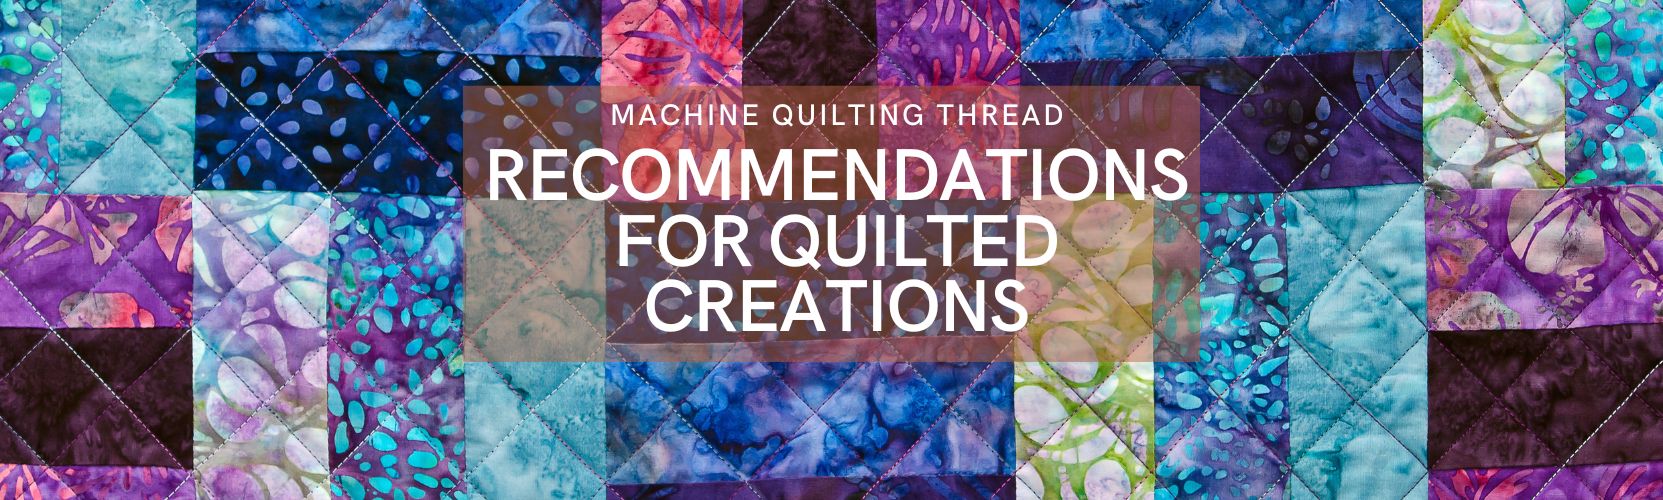 Machine Quilting Thread: Recommendations for Beautiful Quilted Creations